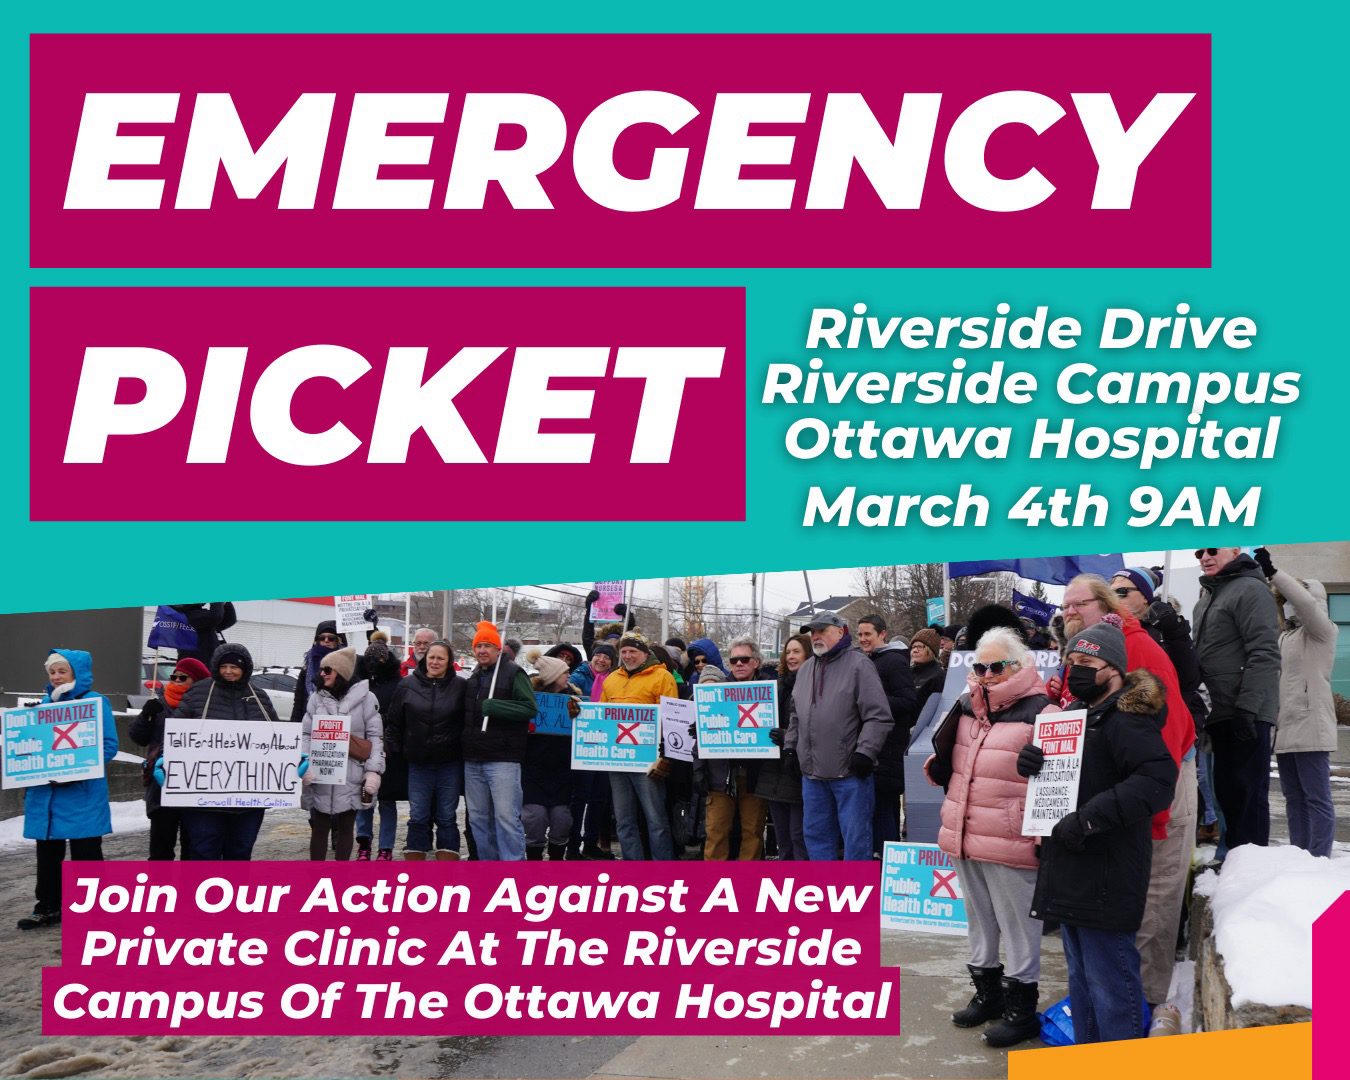 Emergency Picket. Riverside Drive, Riverside Campus, Ottawa Hospital. March 4th 9am. Join our action against a new private clinic at the riverside campus of The Ottawa Hospital.